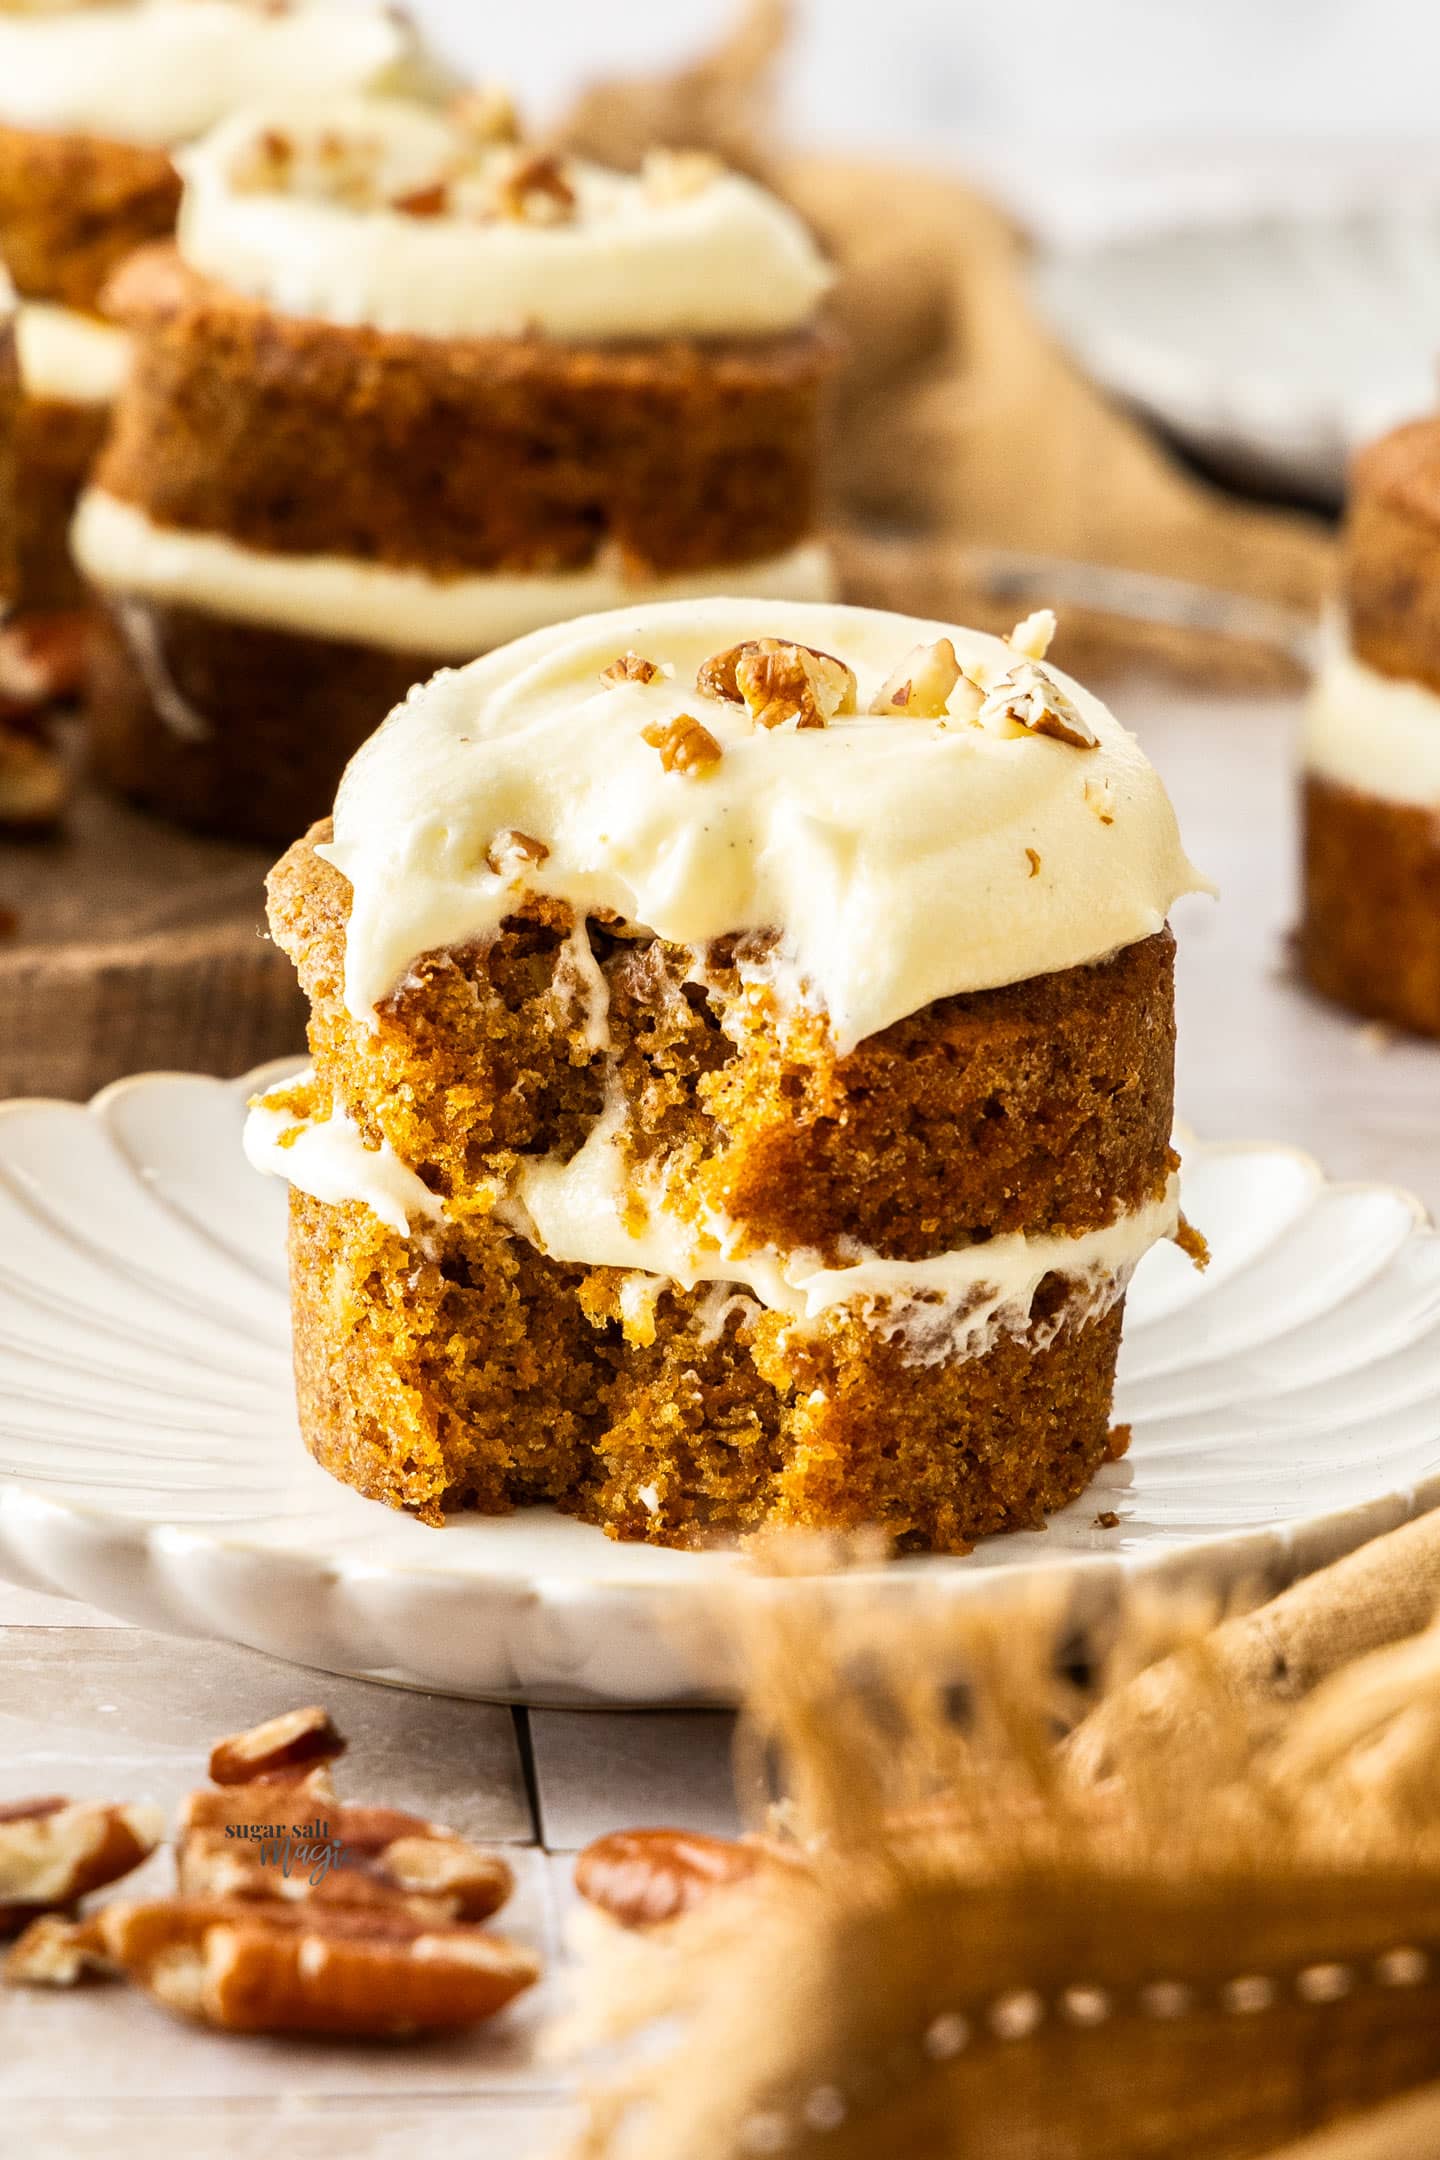 A mini carrot cake with a forkful cut out showing the fluffy texture.